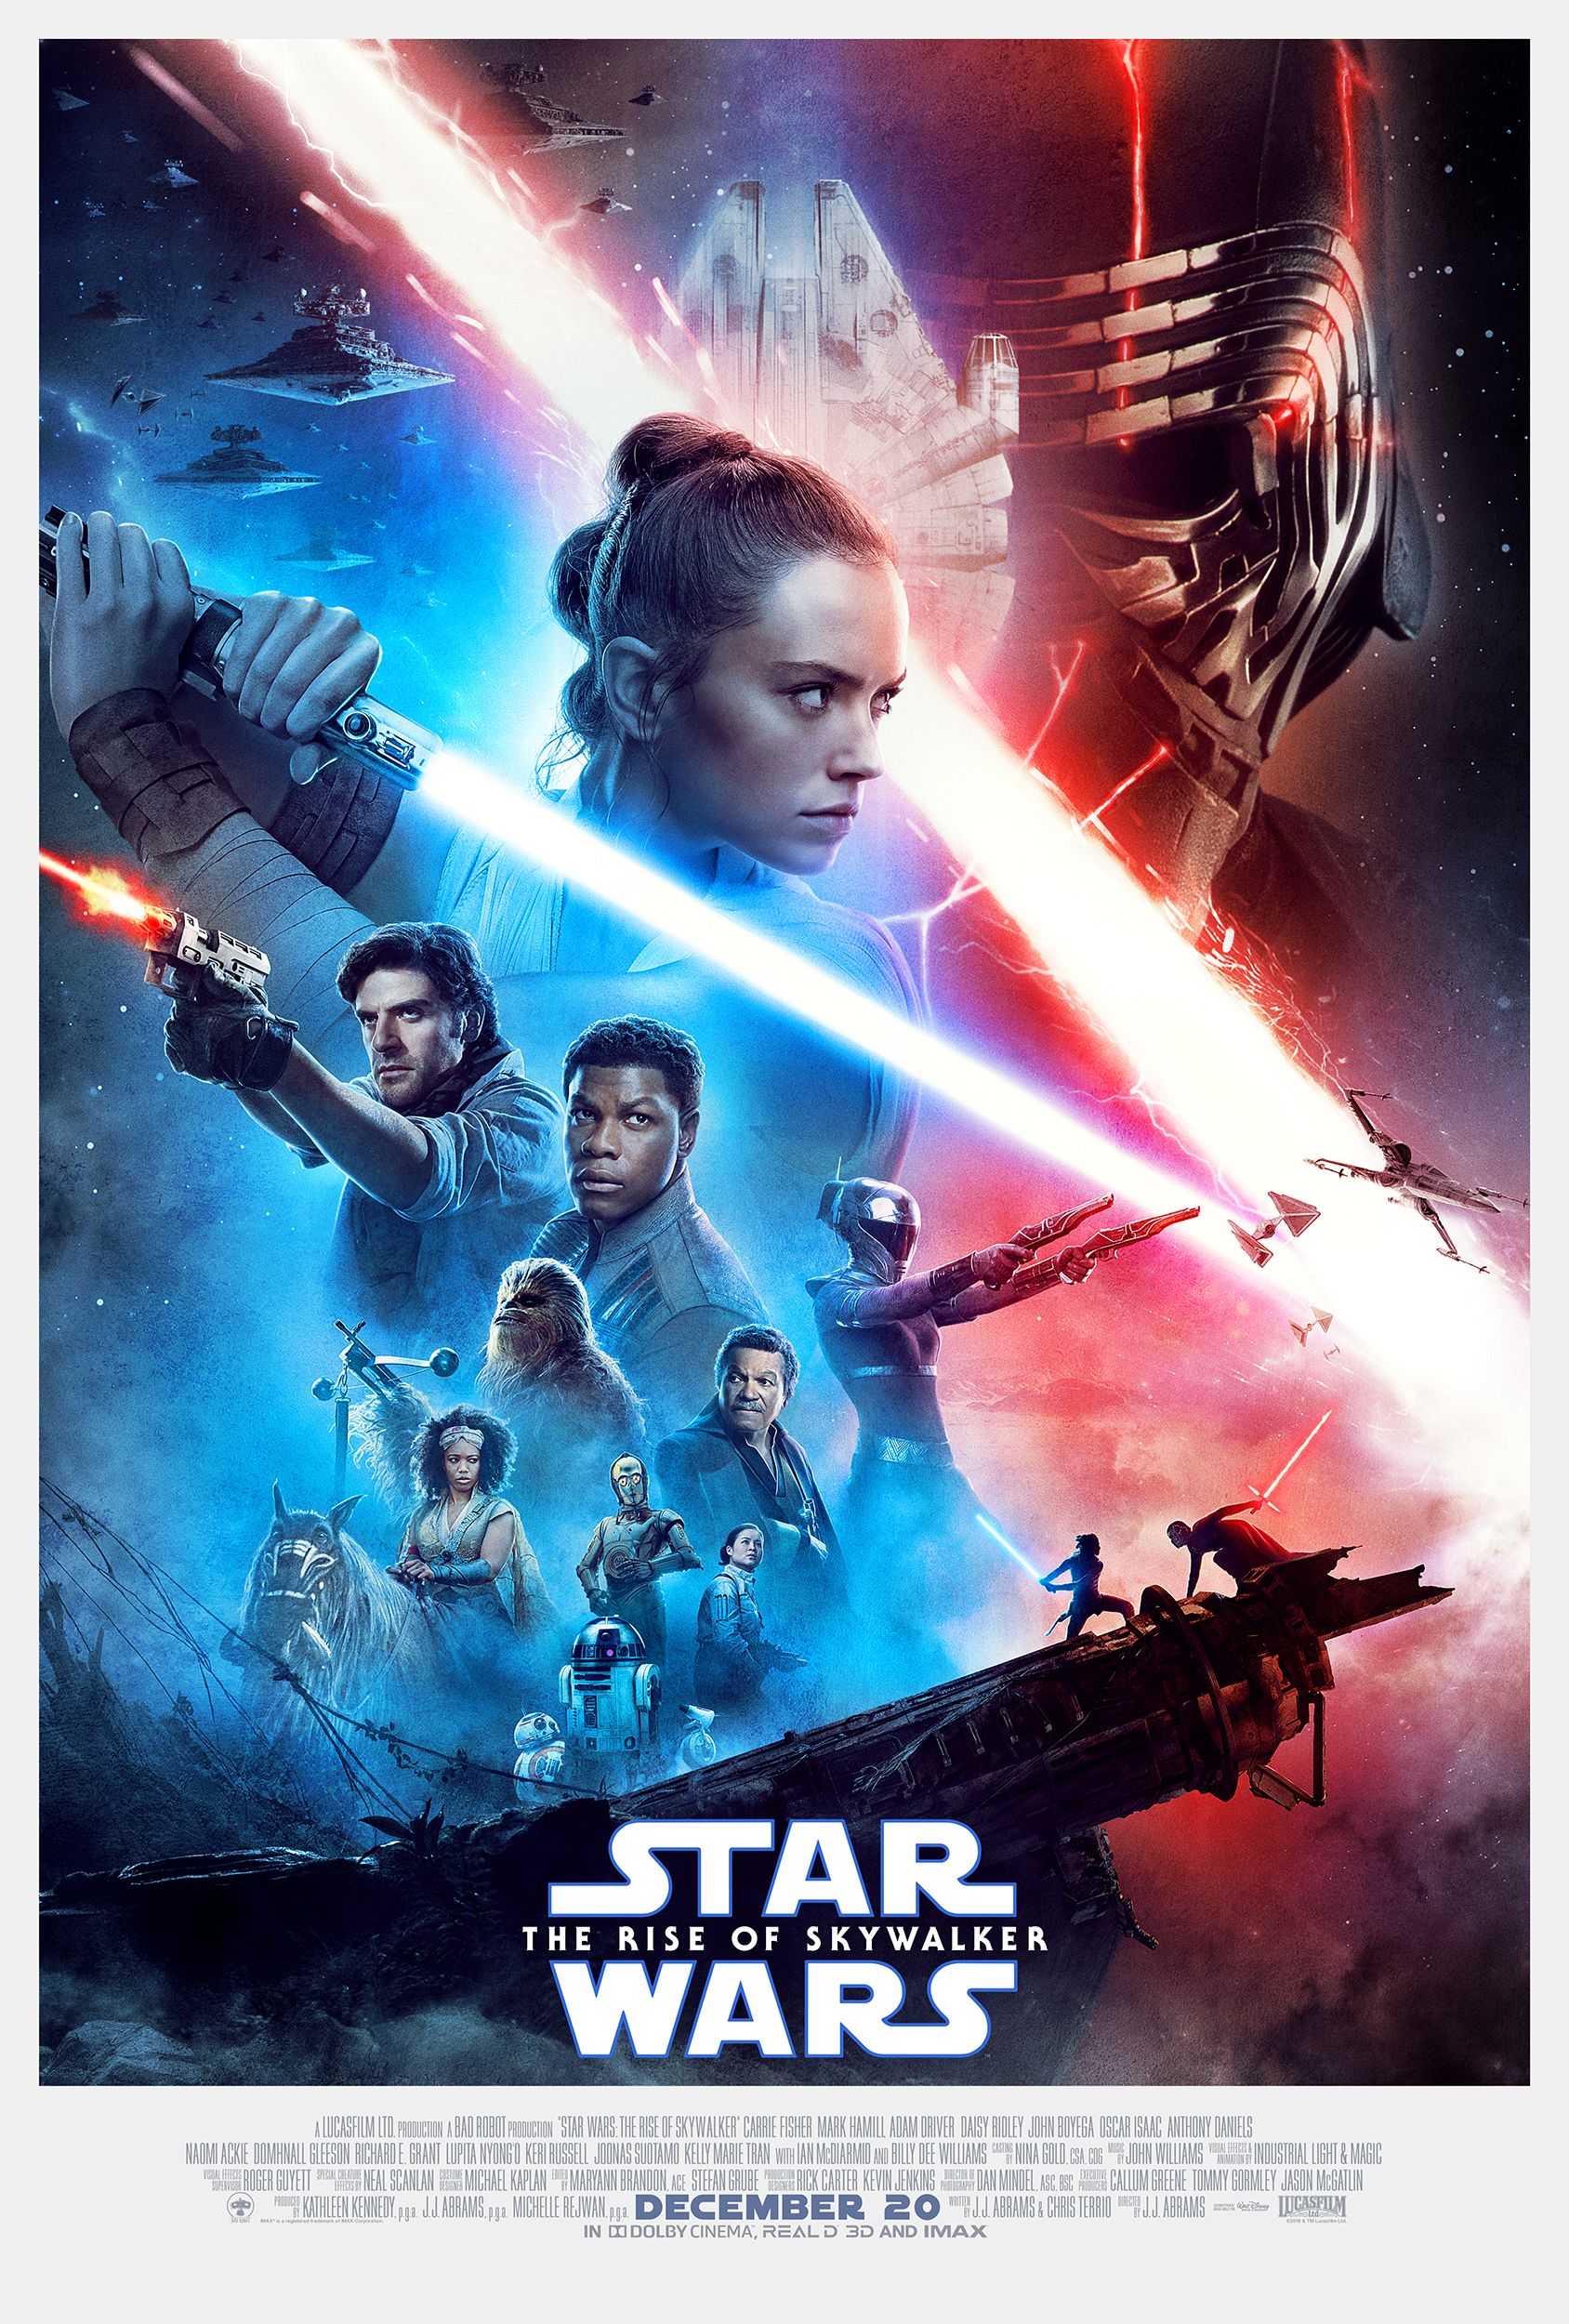 The Rise of Skywalker Payoff poster